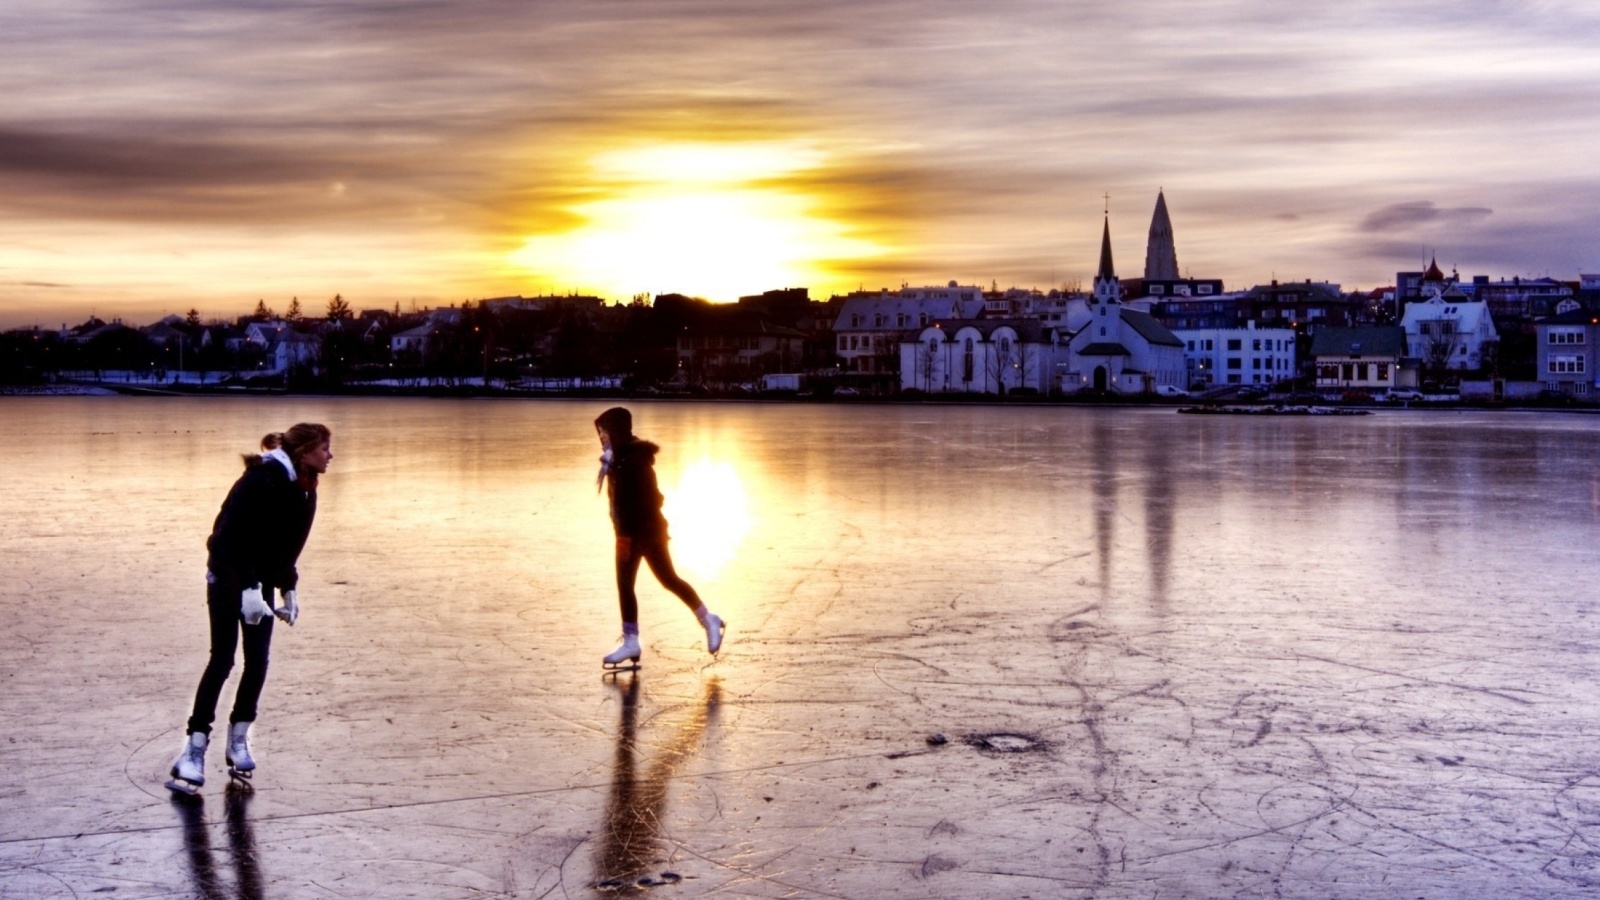 Ice Skating in Iceland wallpaper 1600x900